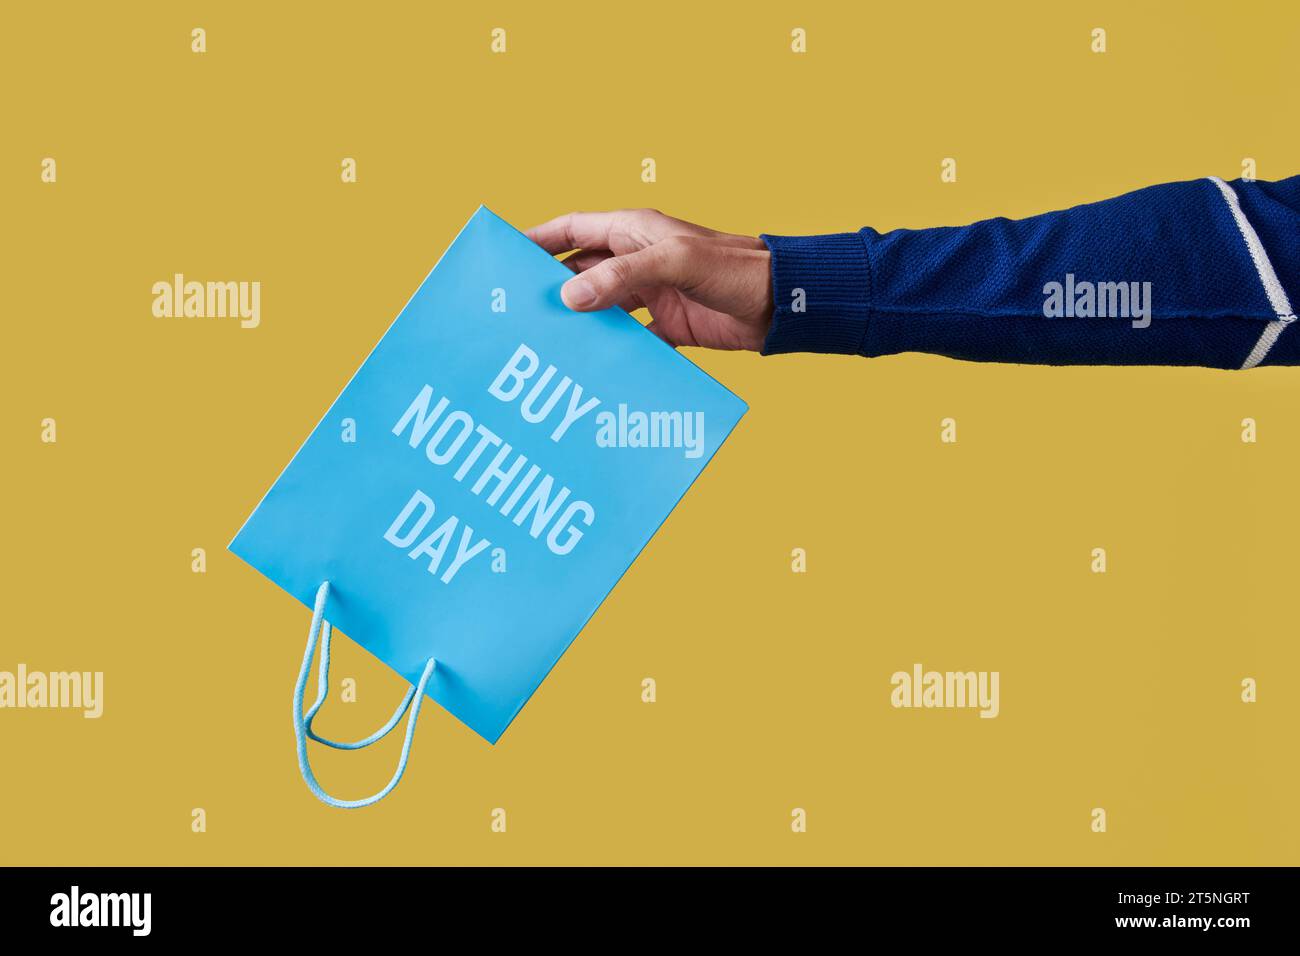 closeup of a man holding a blue shopping paper bag, with the text buy nothing day written in it, upside-down on a yellow background Stock Photo